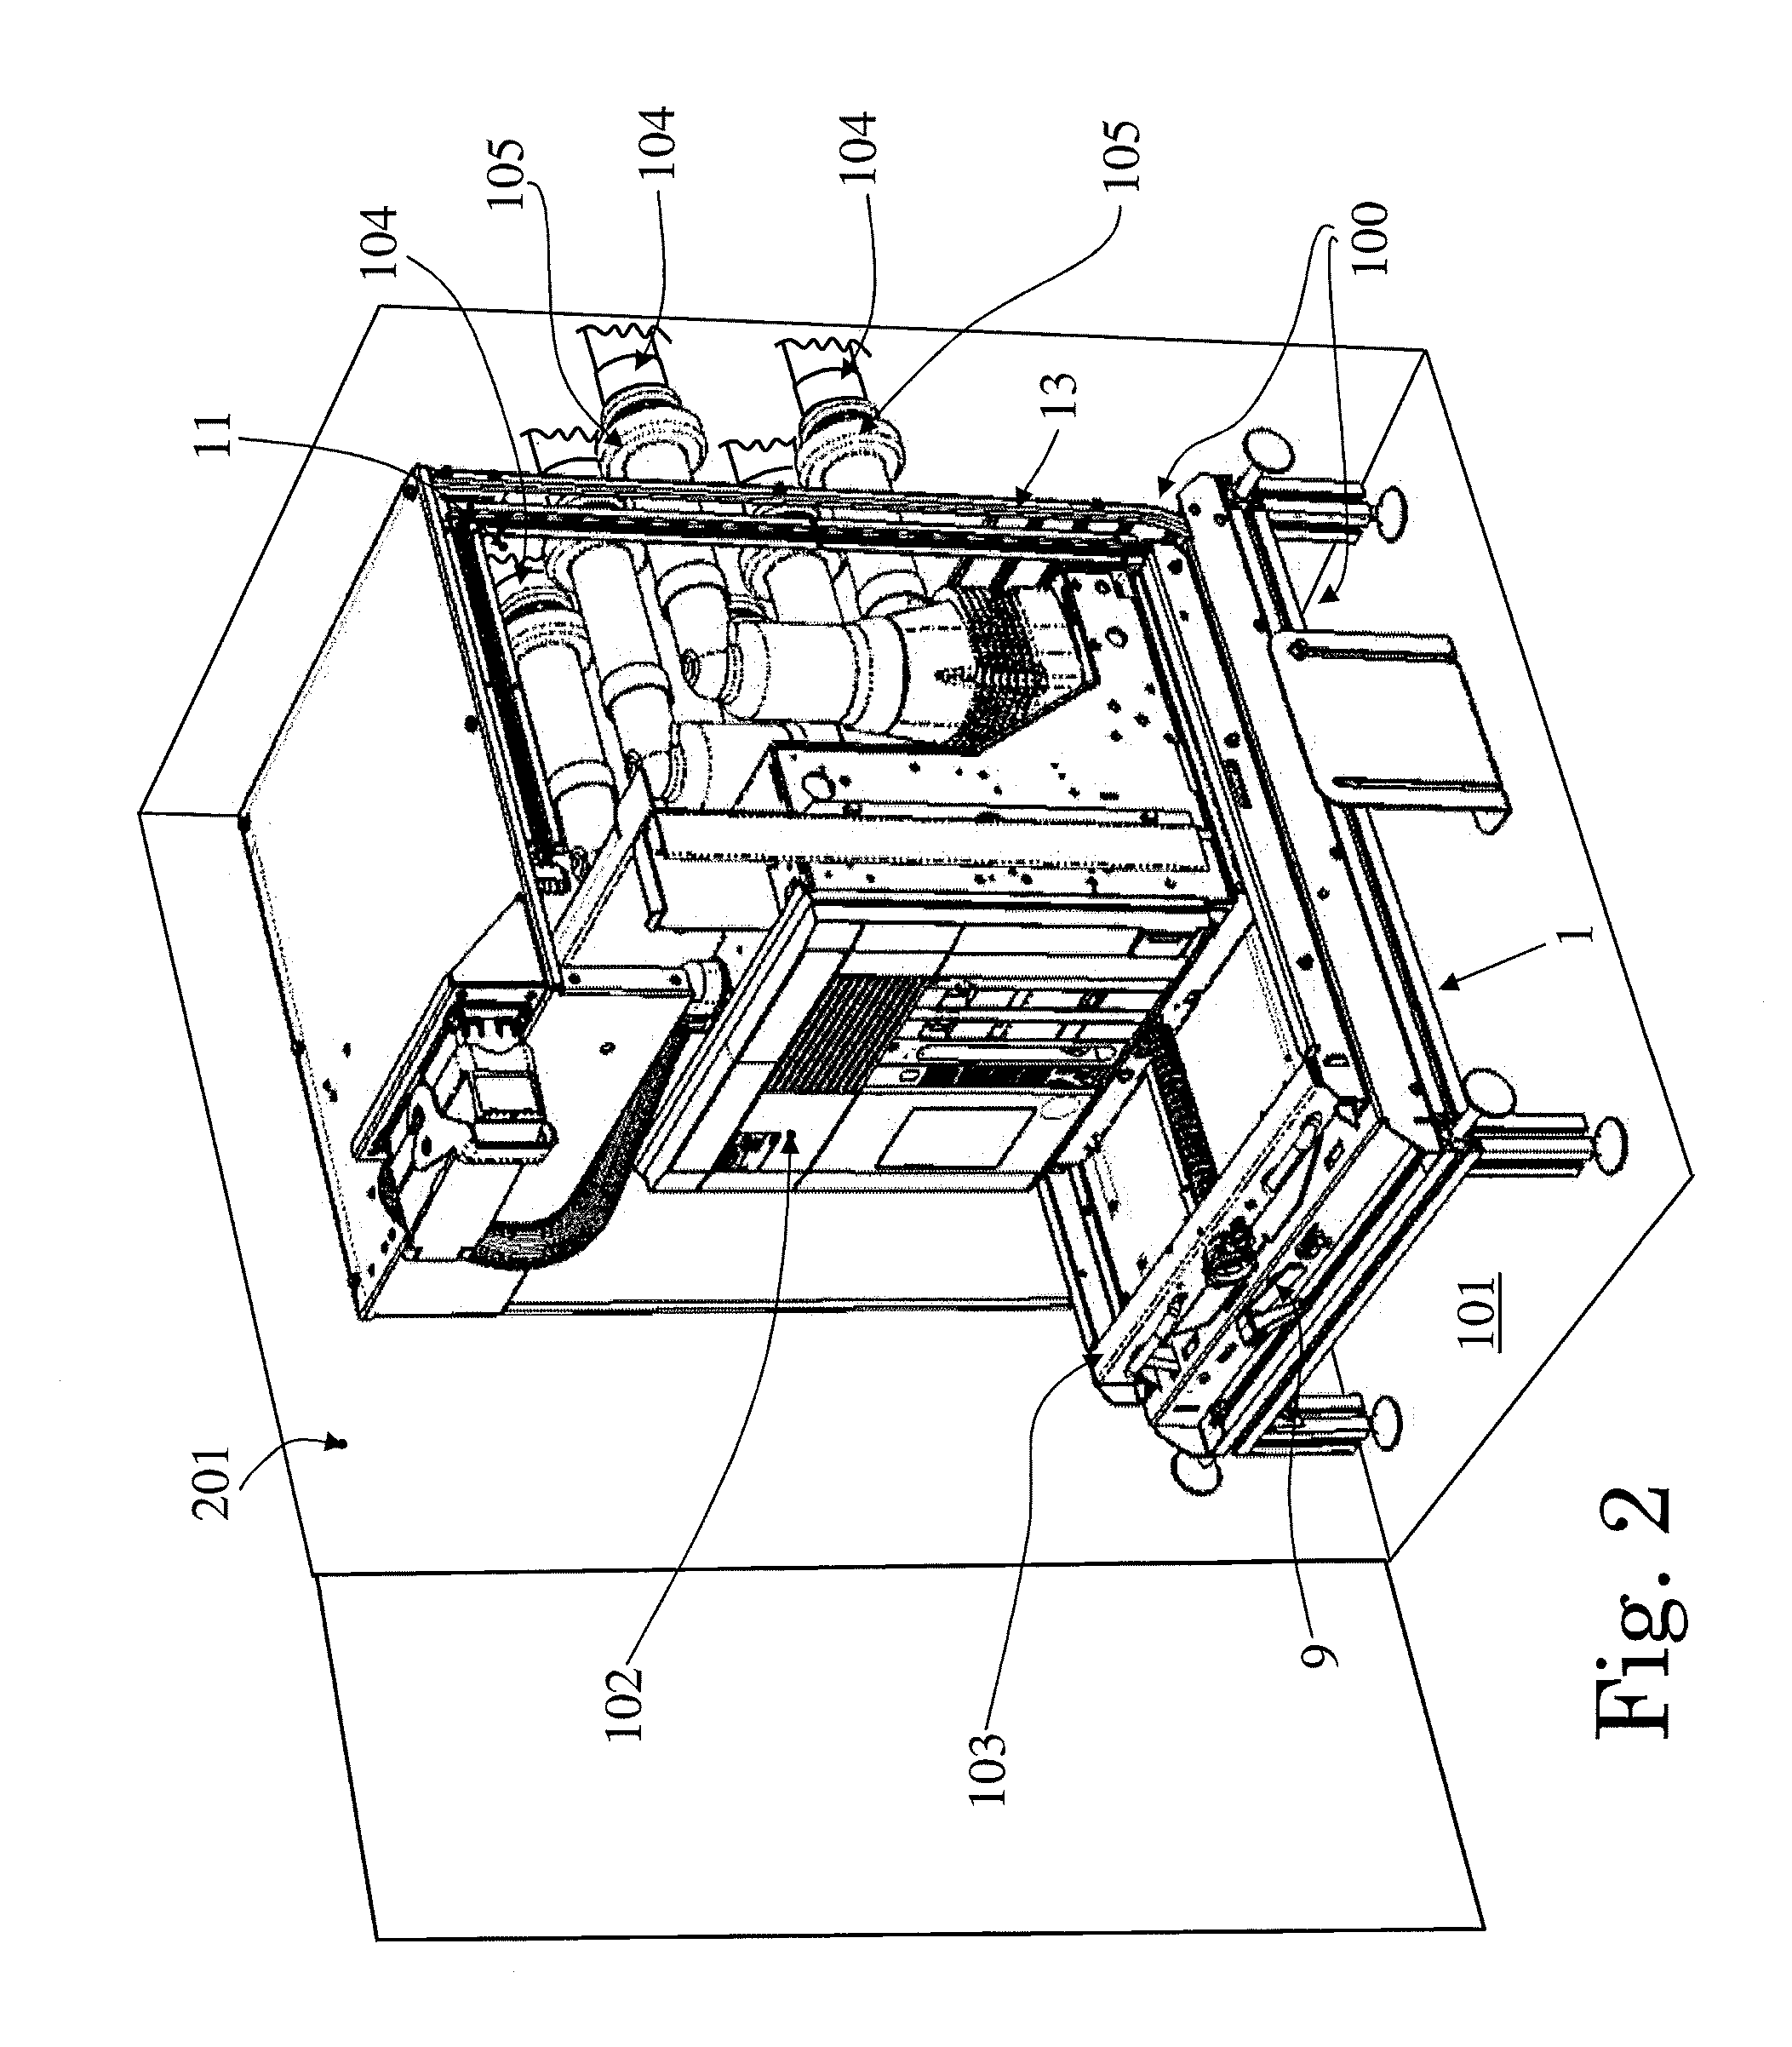 Shutter device for an electrical switchgear panel, and related switchgear panel